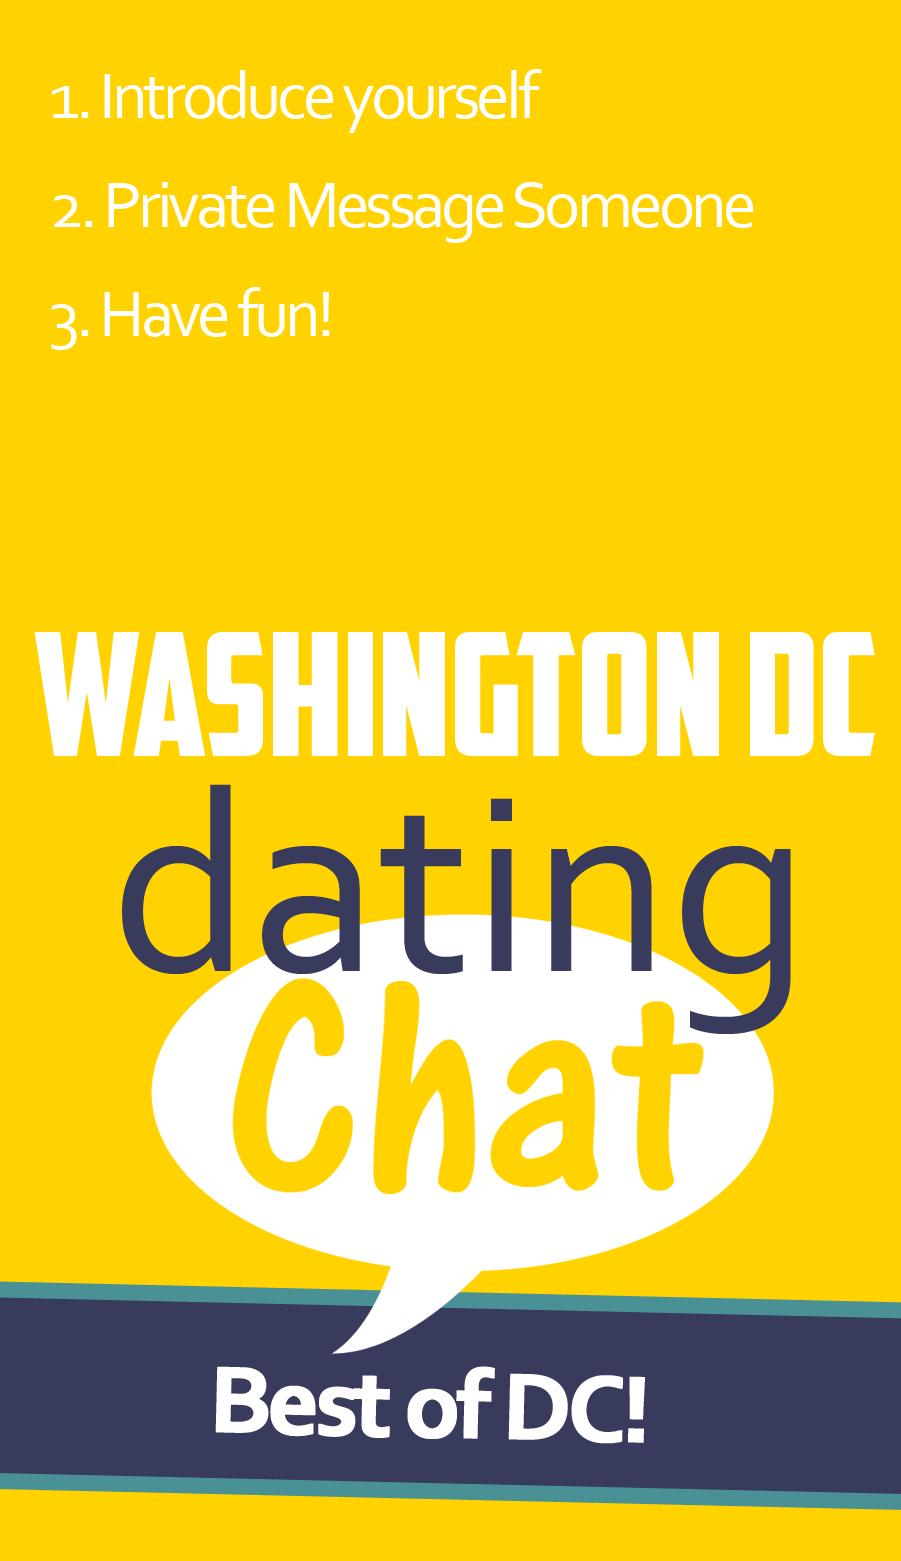 One on one chat free in Washington